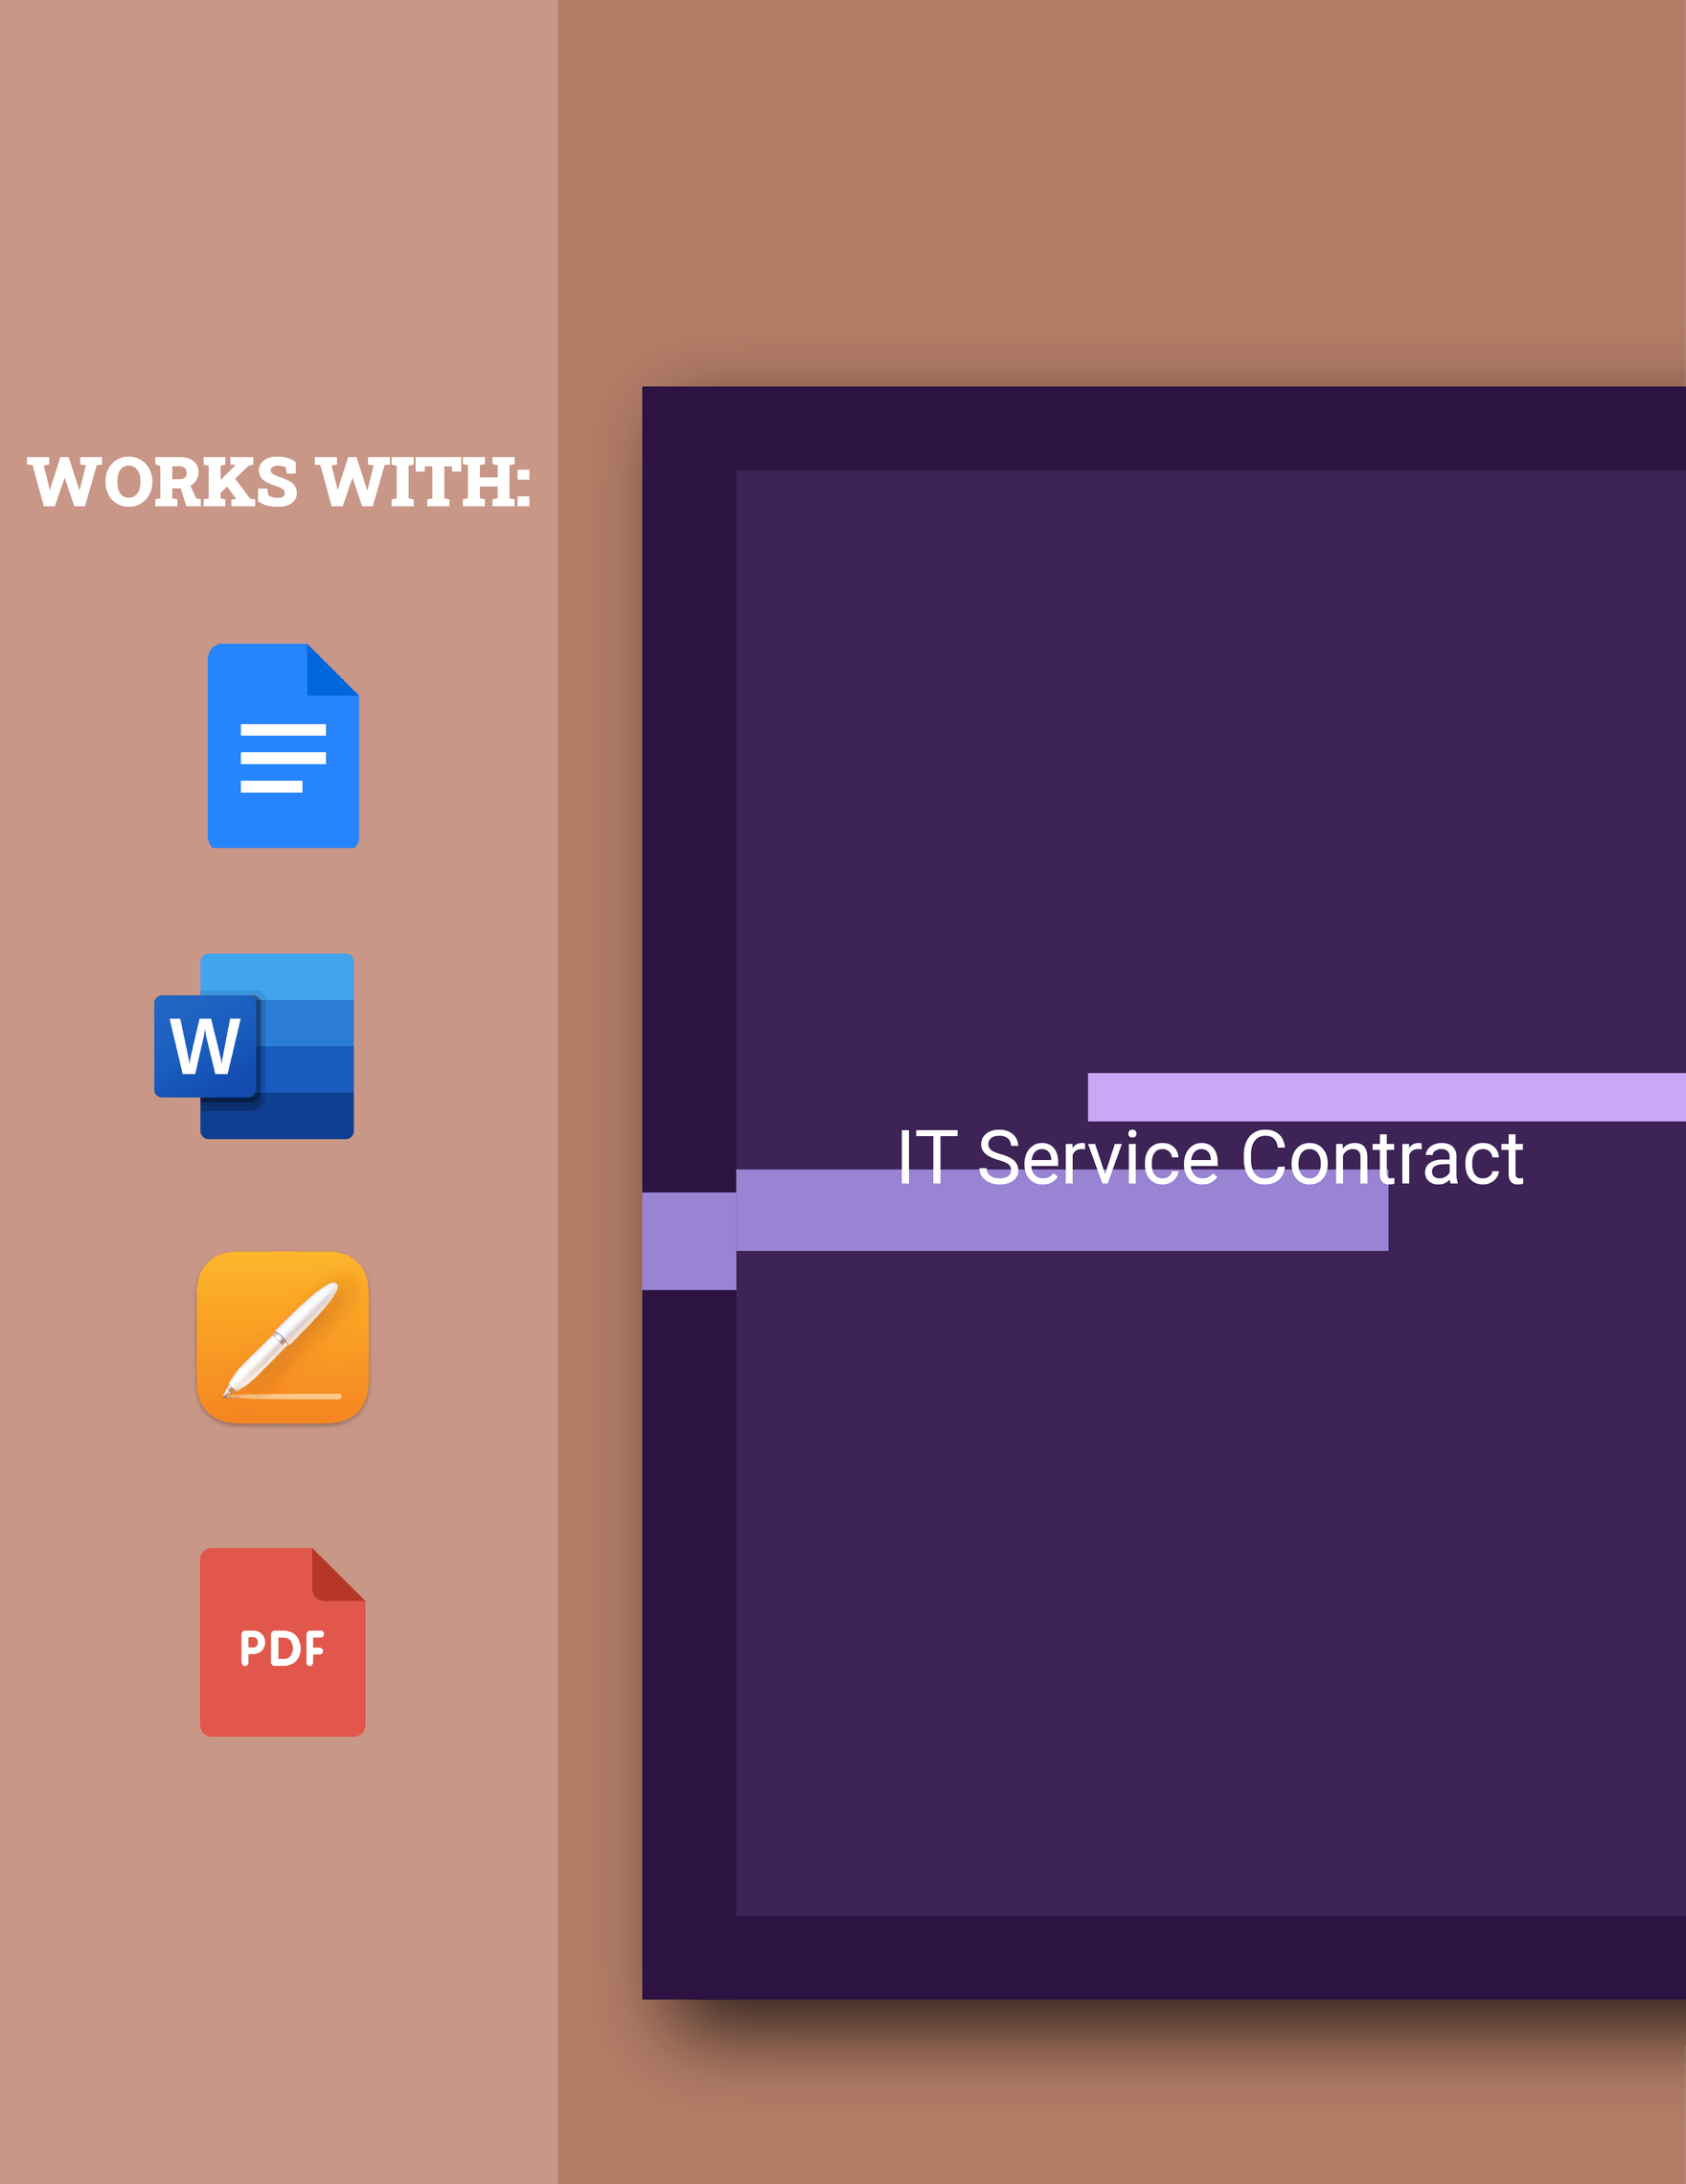 IT Service Contract Template